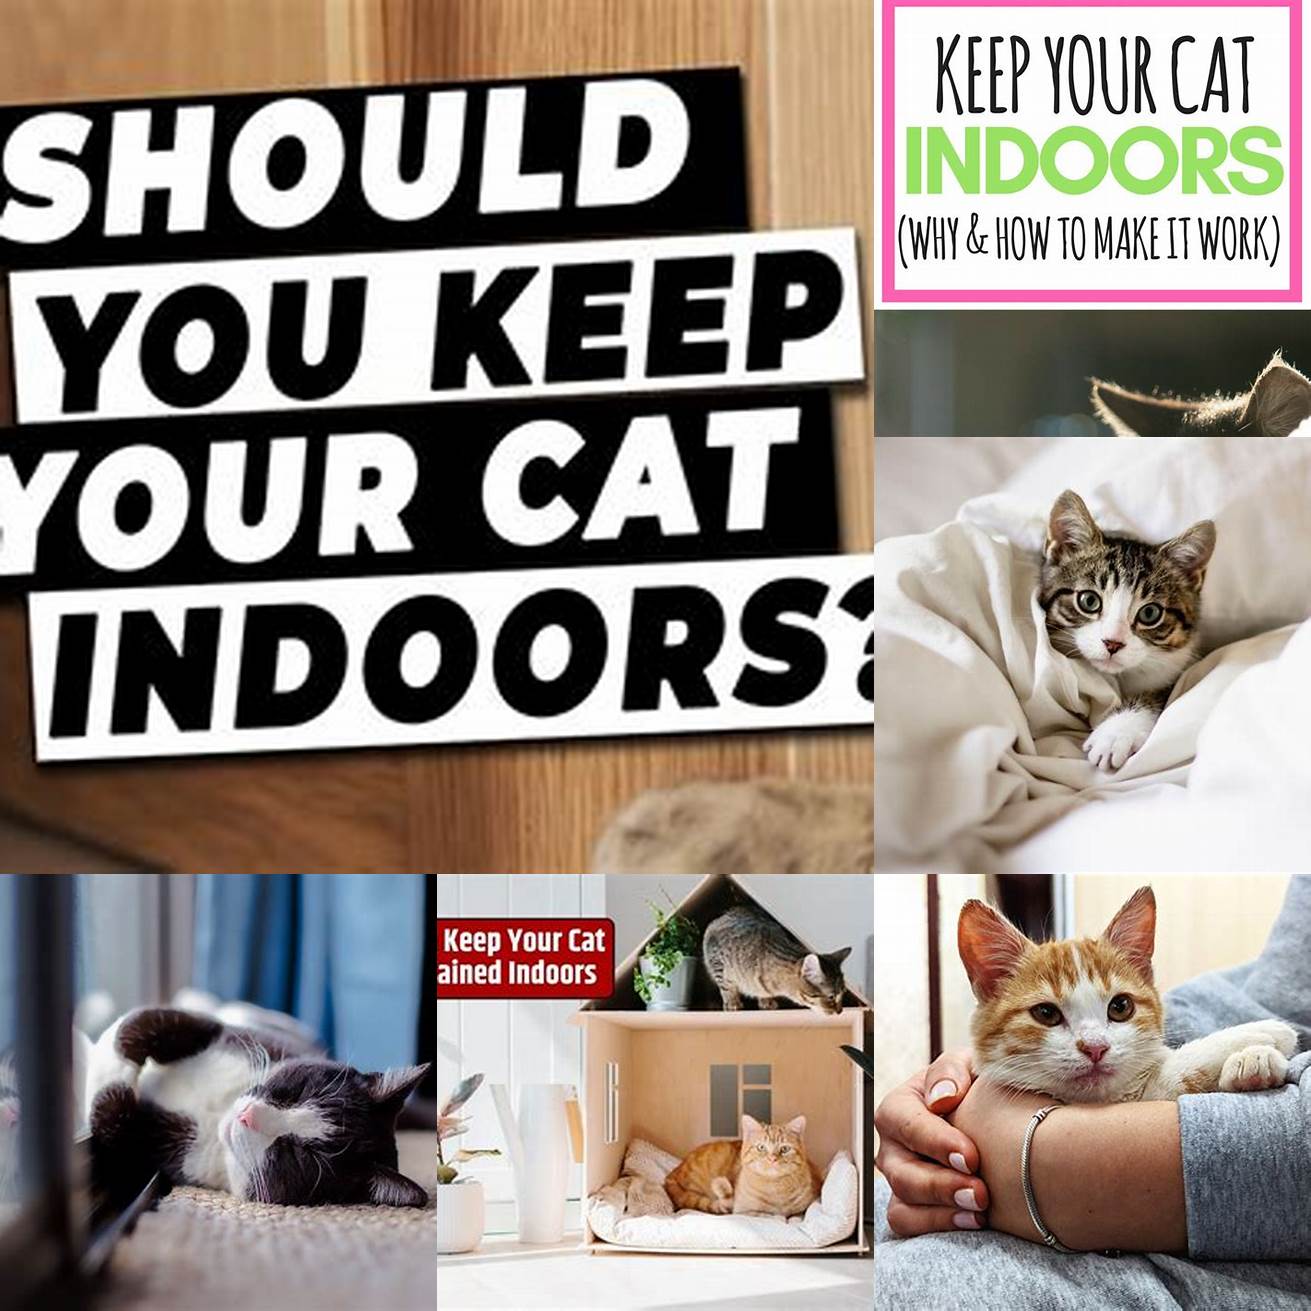 2 Keep your cat indoors